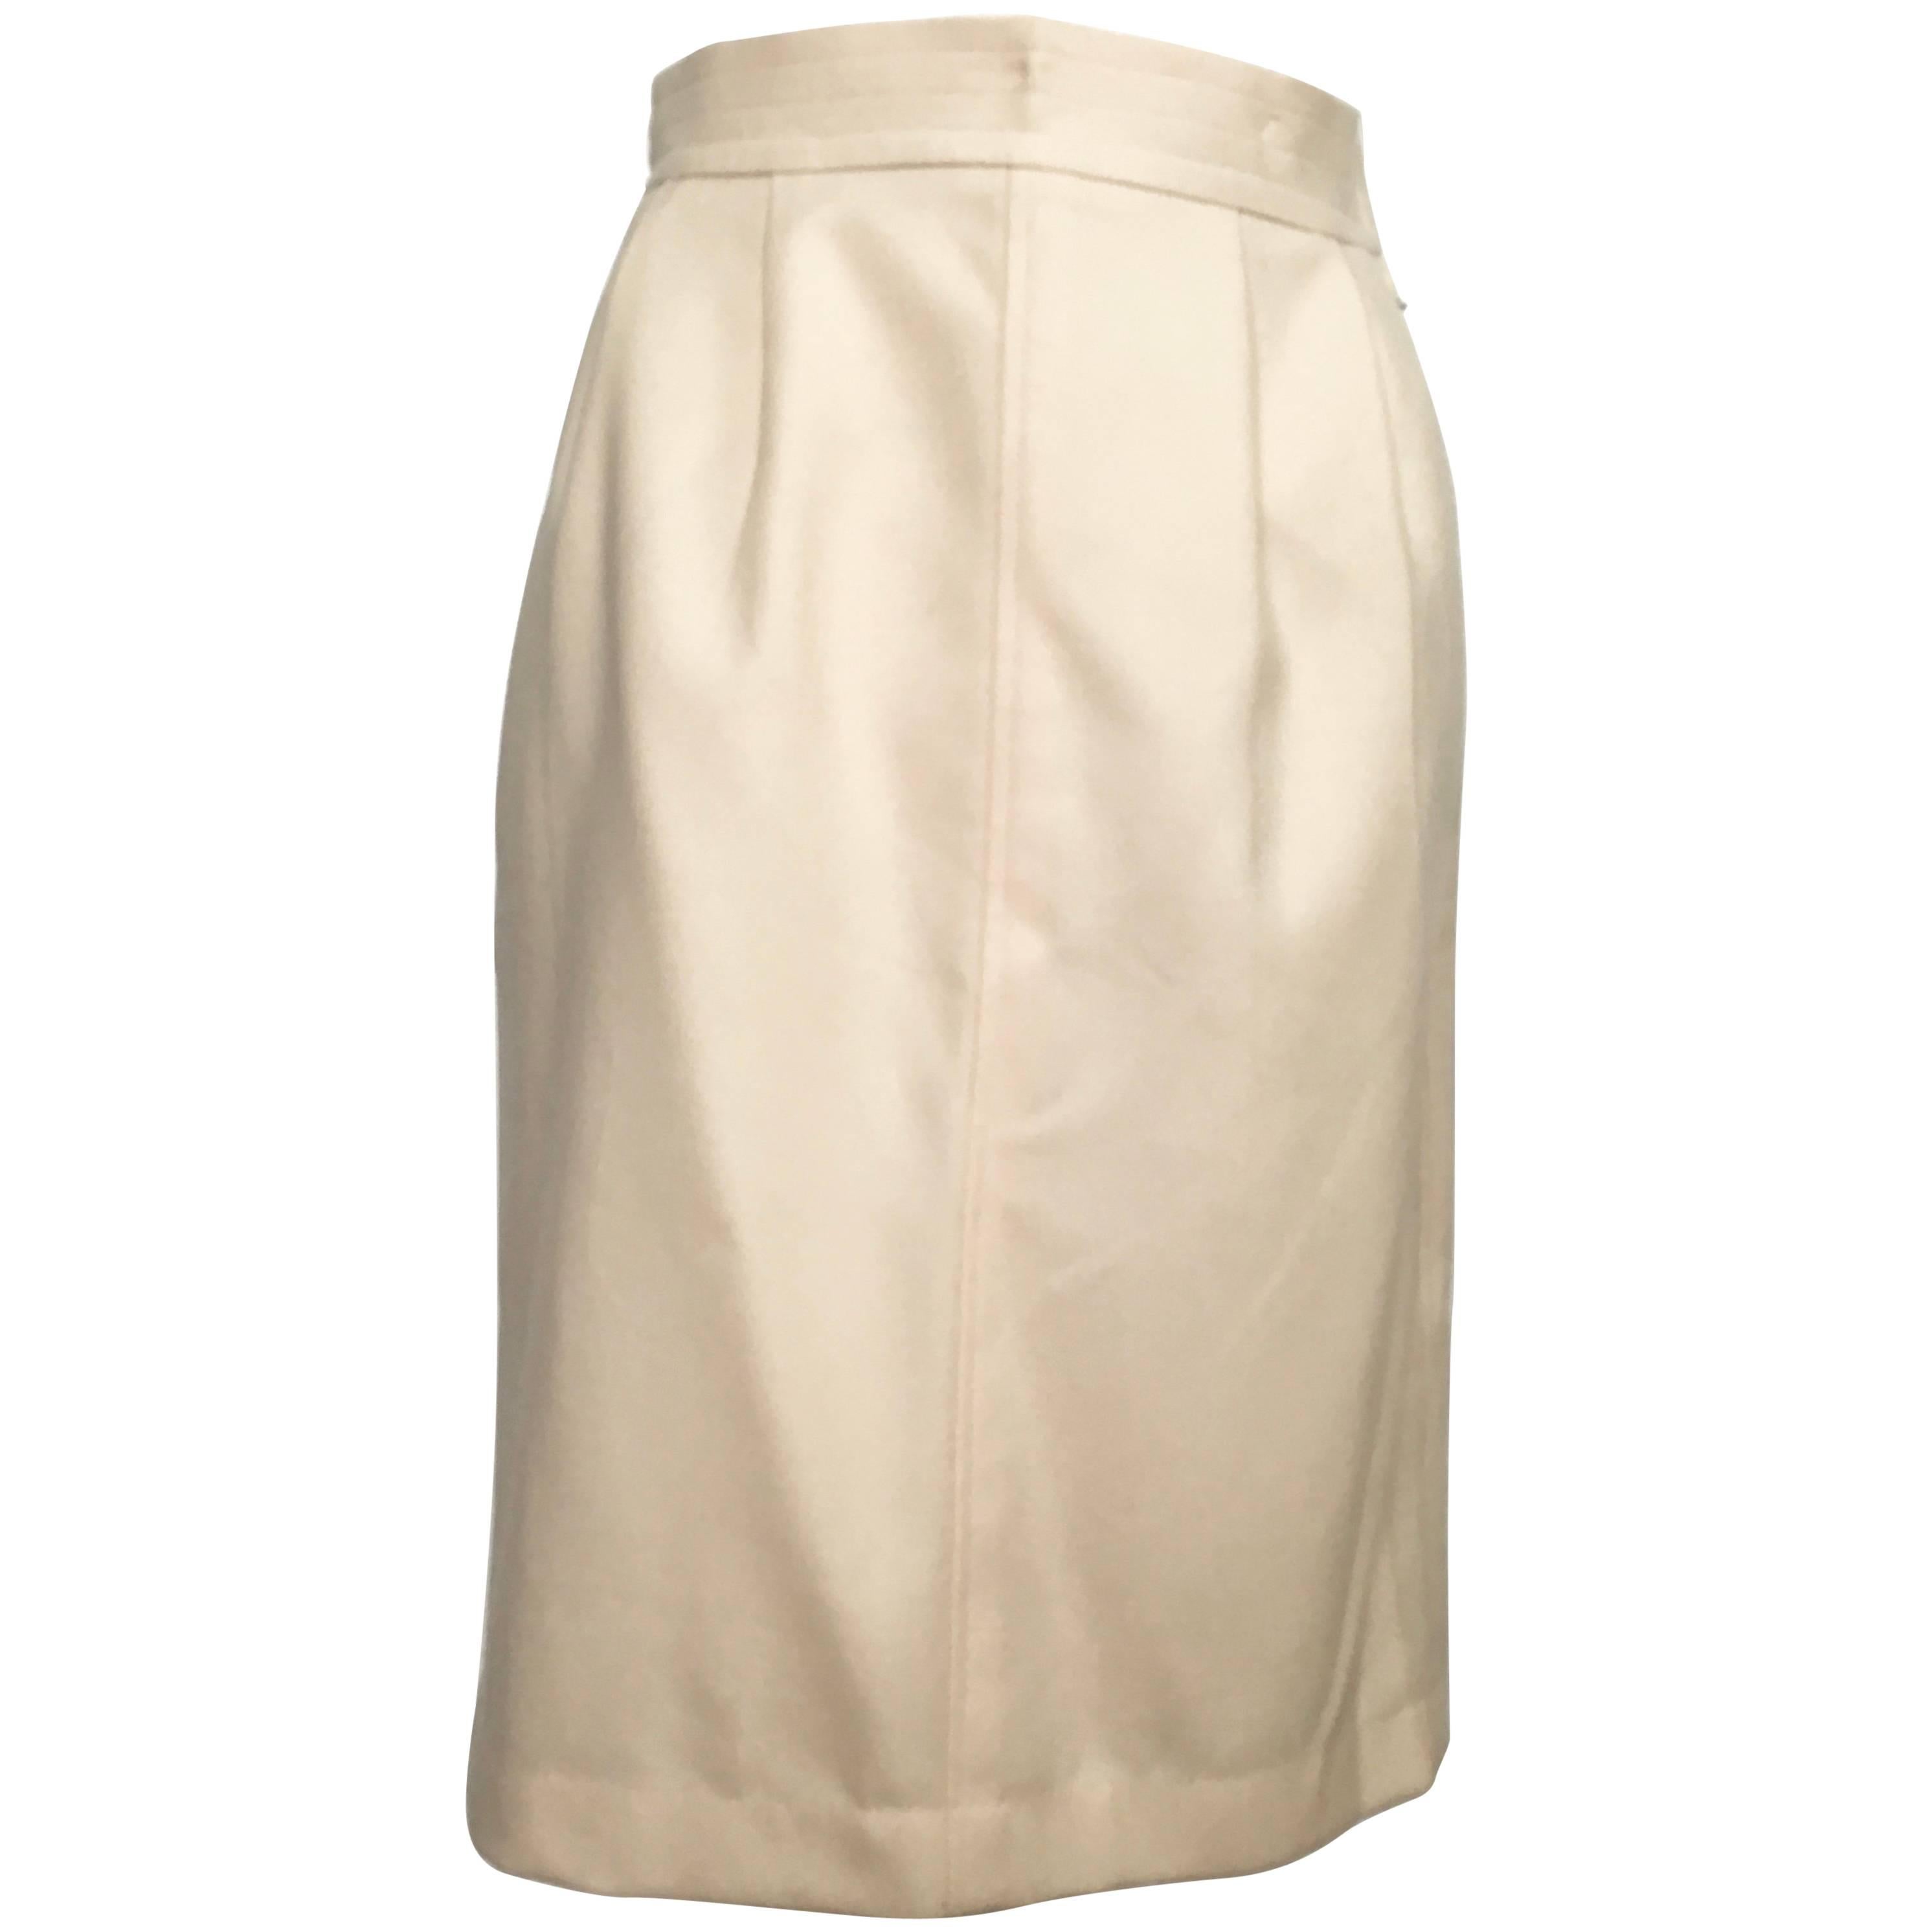 Saint Laurent Rive Gauche Wool Cream Pencil Skirt with Pockets, 1980s  For Sale